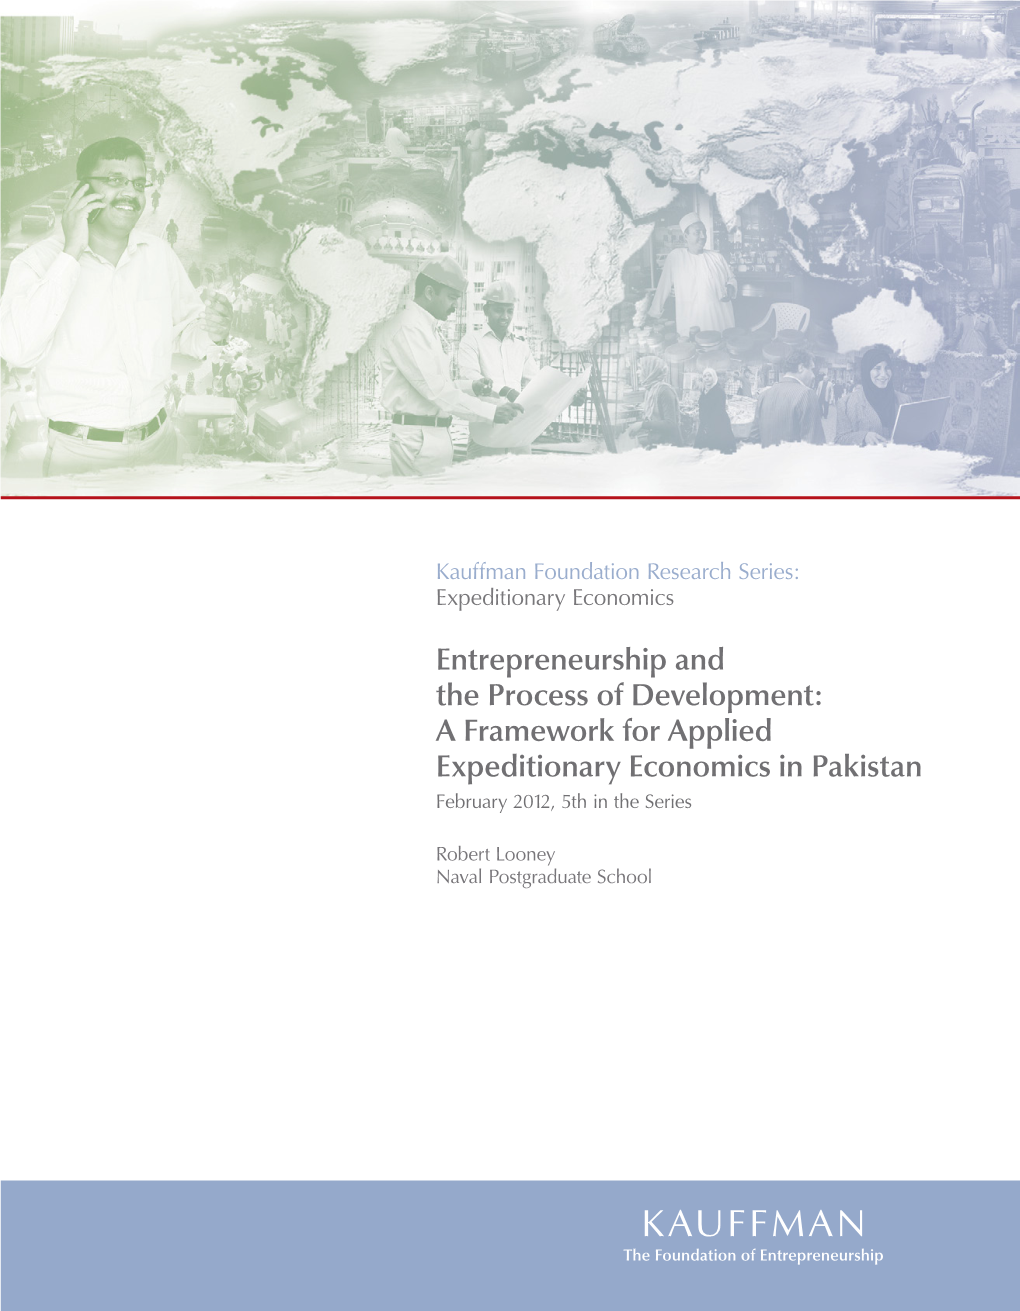 Entrepreneurship and the Process of Development: a Framework for Applied Expeditionary Economics in Pakistan February 2012, 5Th in the Series